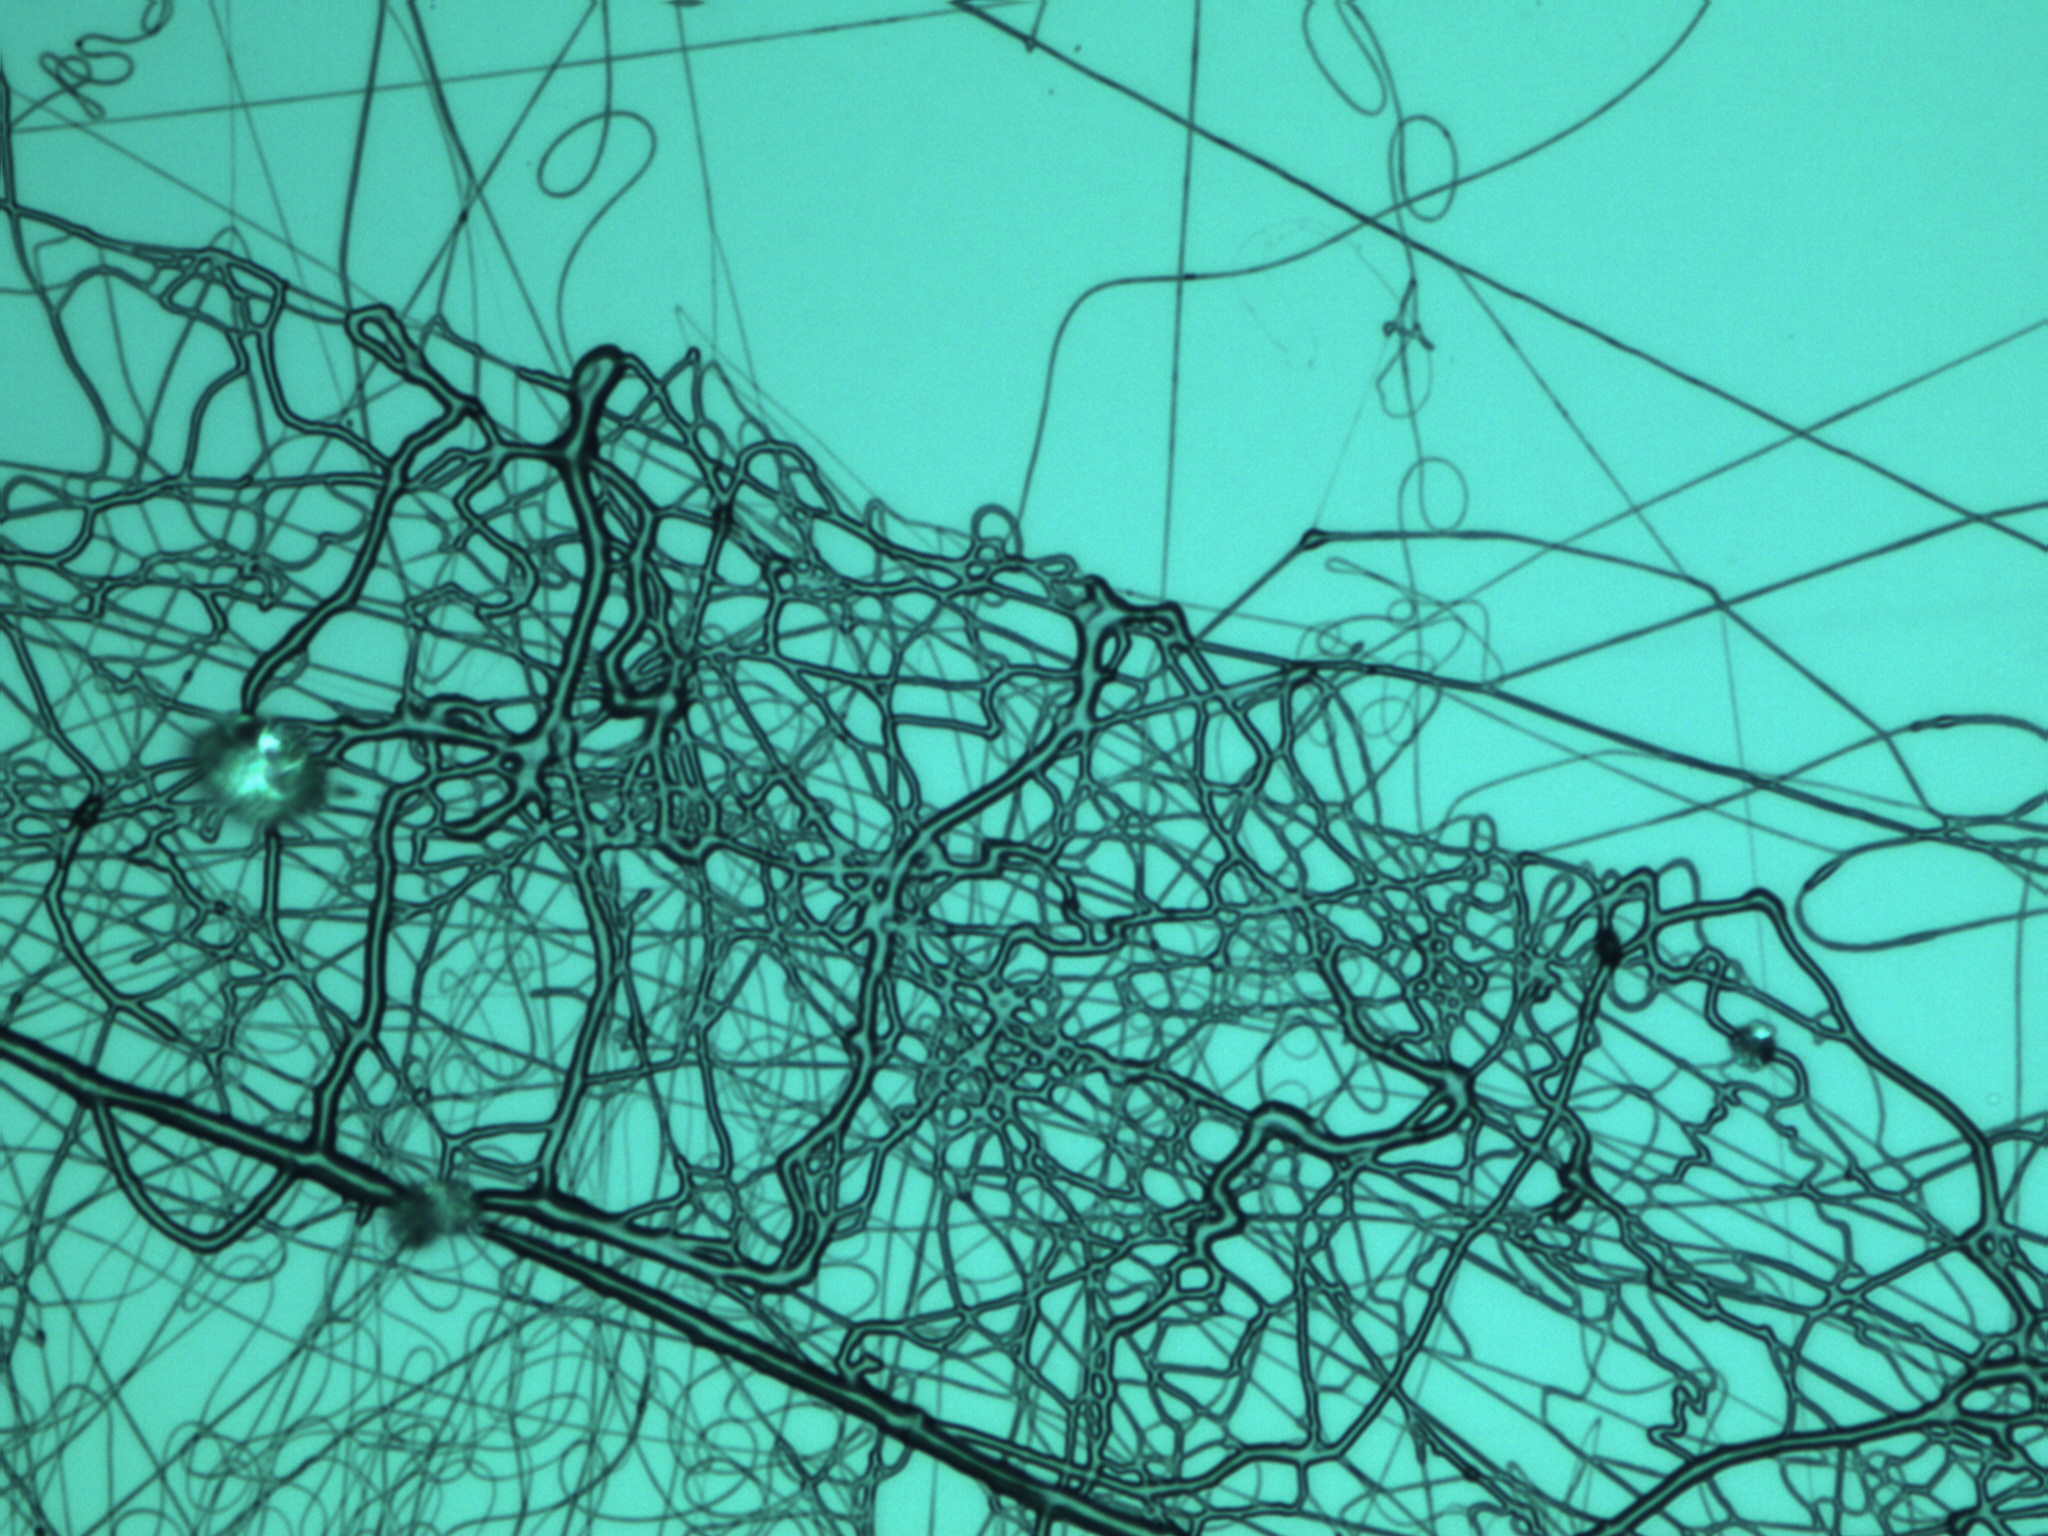 Green background with string like fibers shown in black, as if in a tangle.